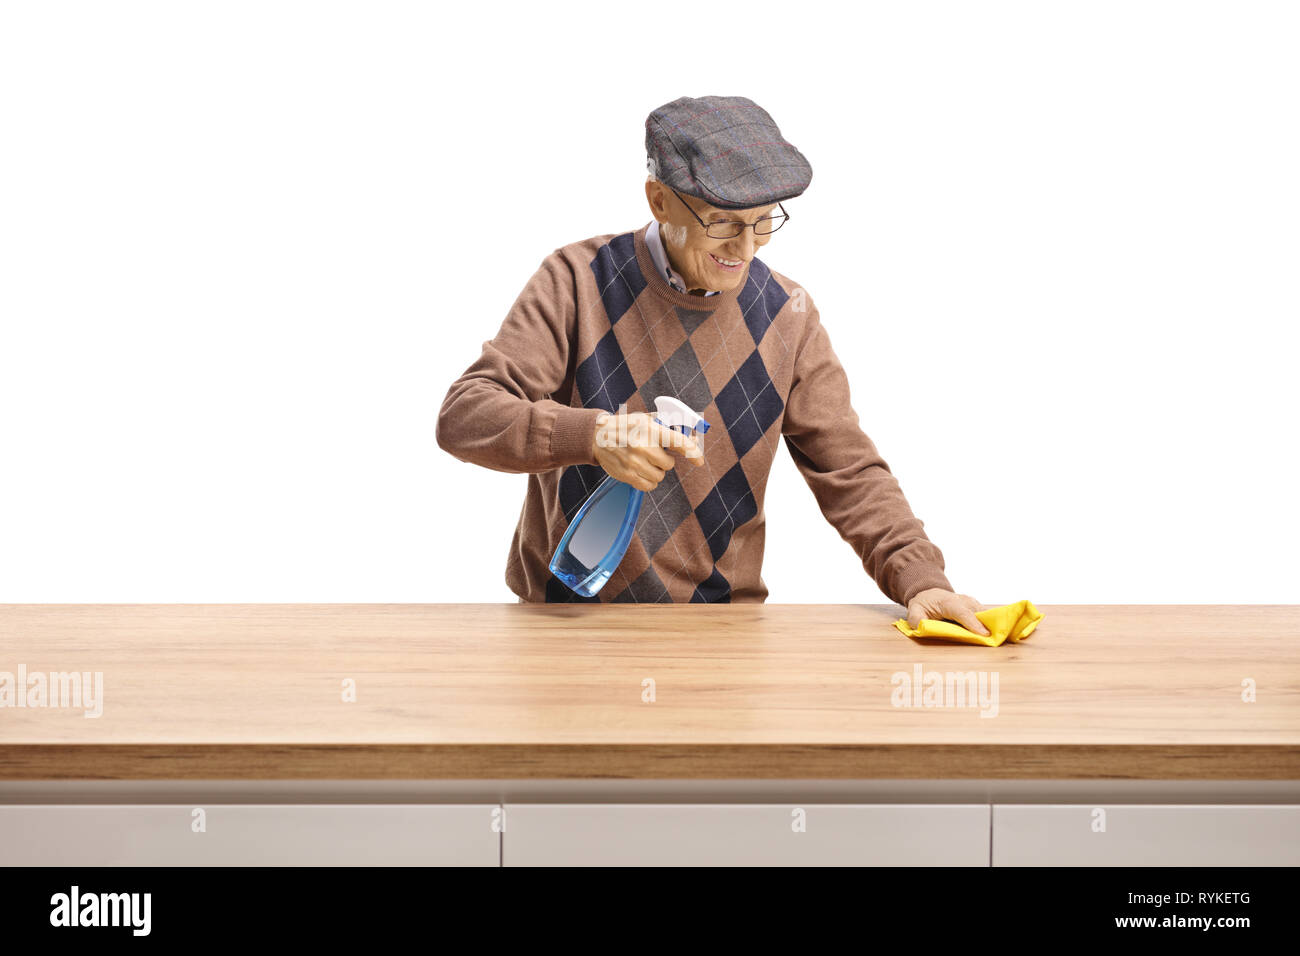 Elderly man cleaning a wooden counter isolated on white background Stock Photo